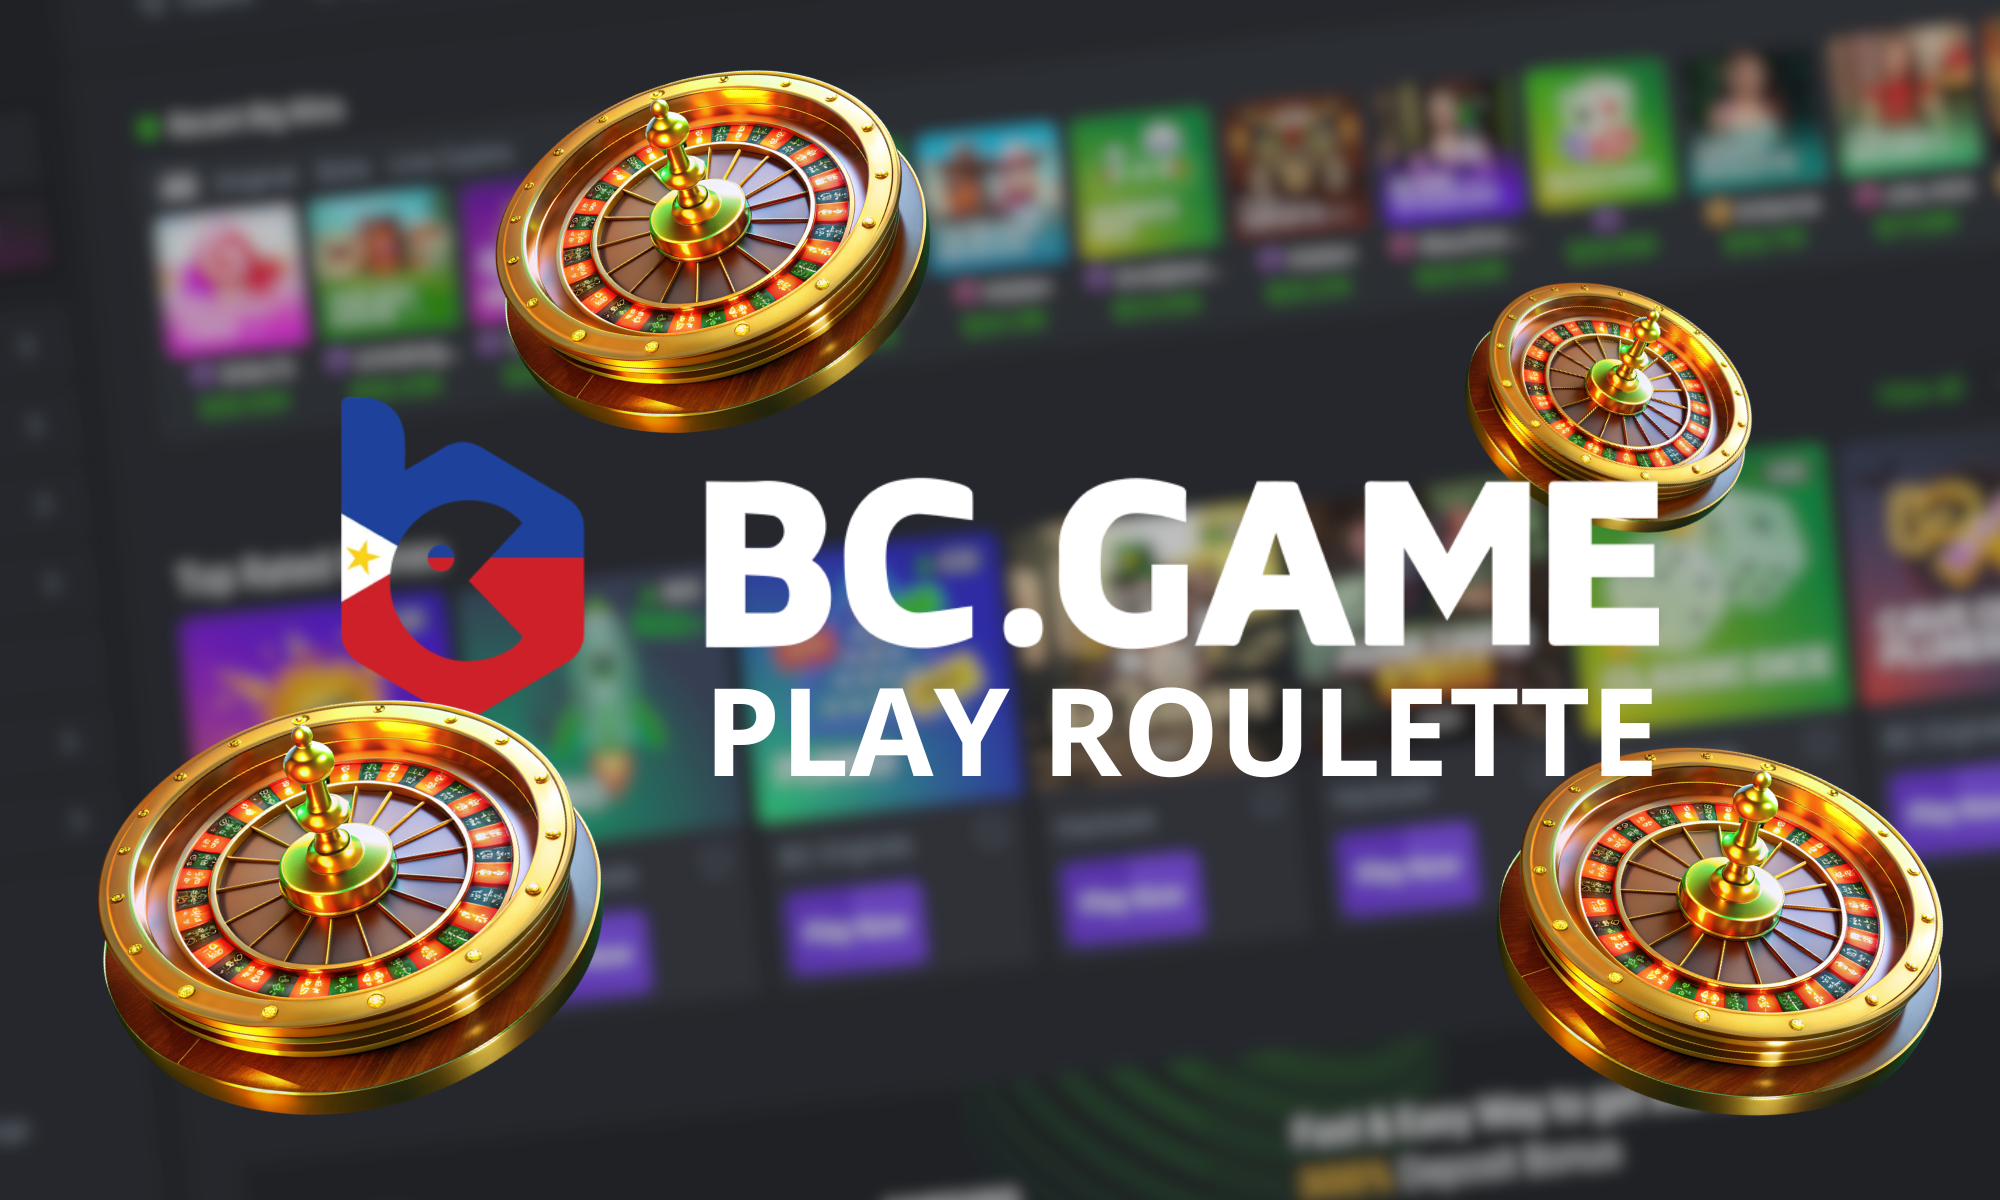 Try roulette at BC Game with a 180% Match first deposit bonus that goes up to PHP 1,161,000.